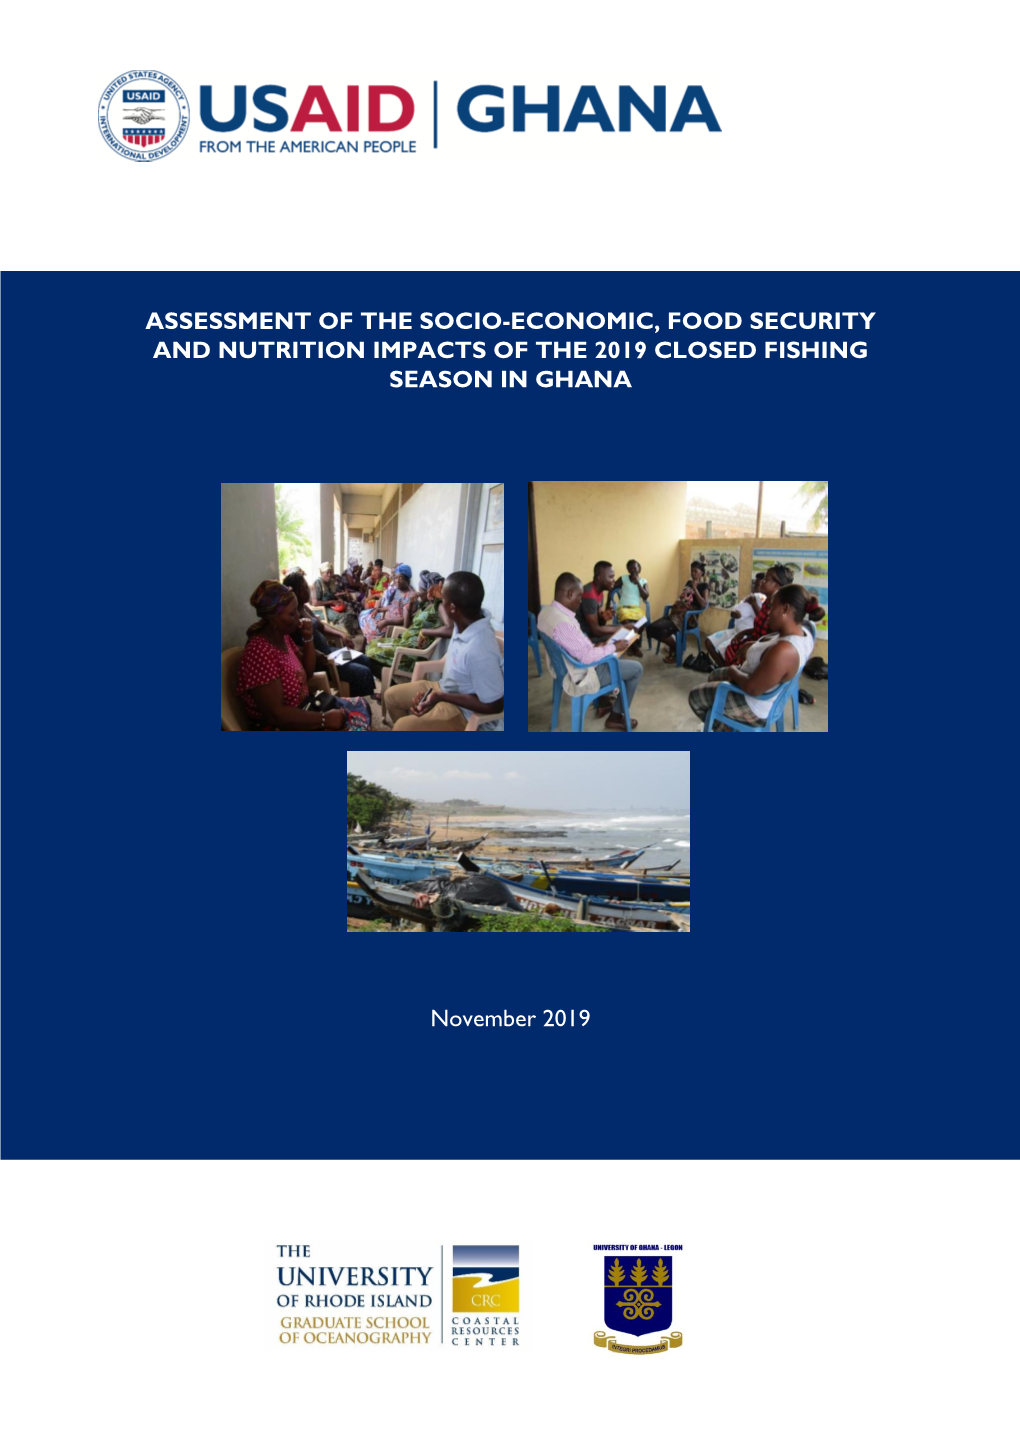 Assessment of the Socio-Economic, Food Security and Nutrition Impacts of the 2019 Closed Fishing Season in Ghana